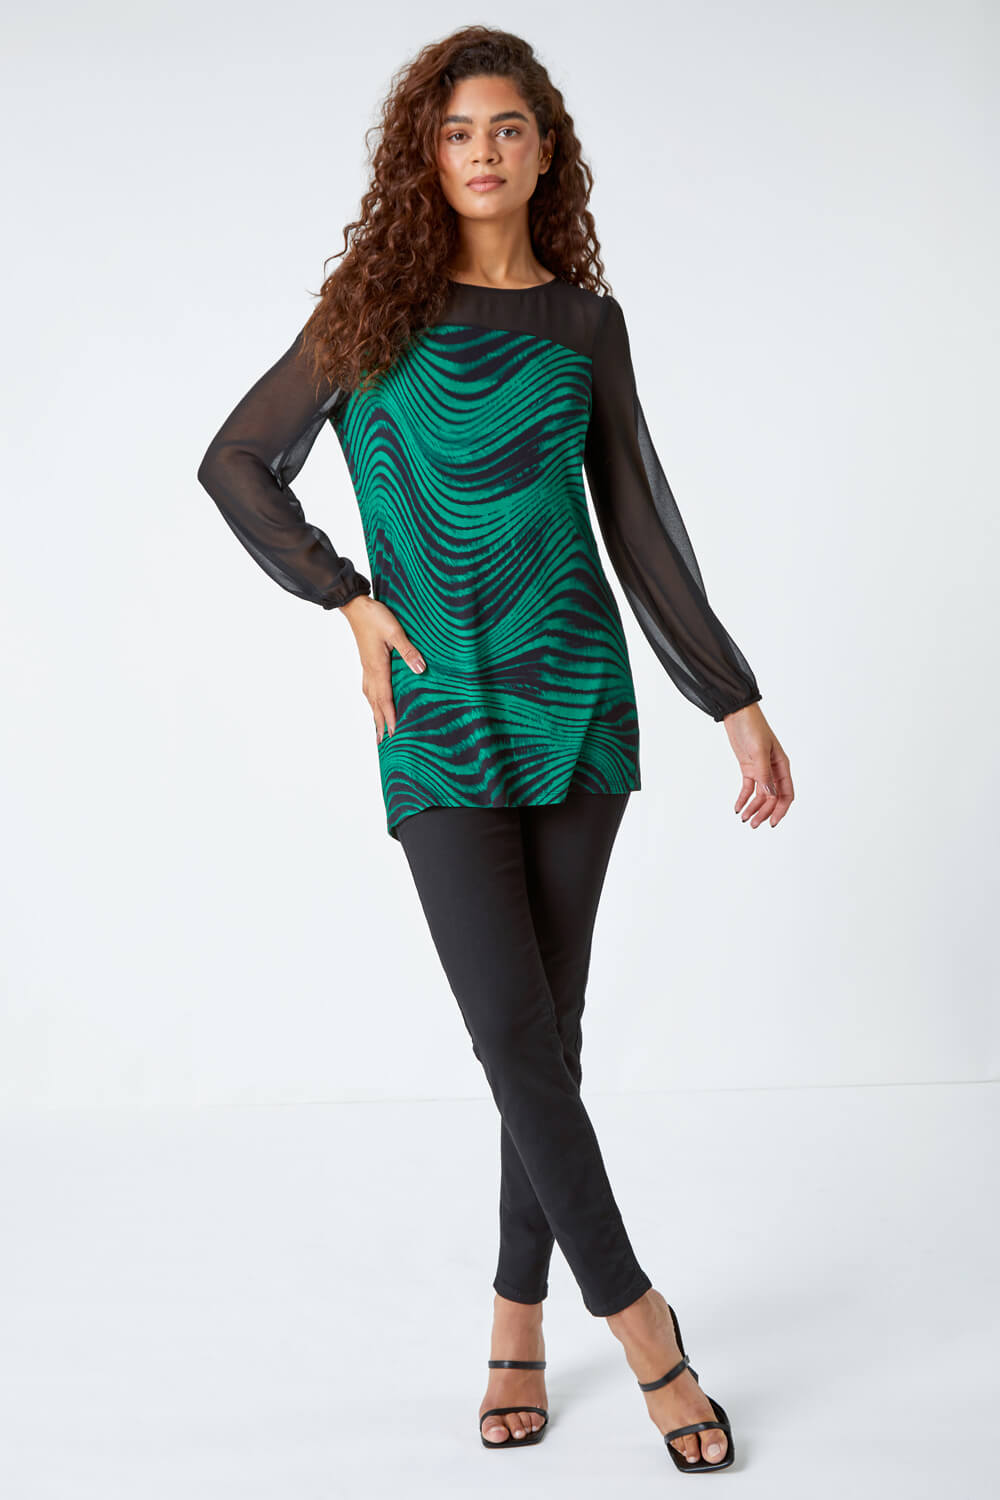 Green Abstract Print Chiffon Sleeve Stretch Top, Image 2 of 5